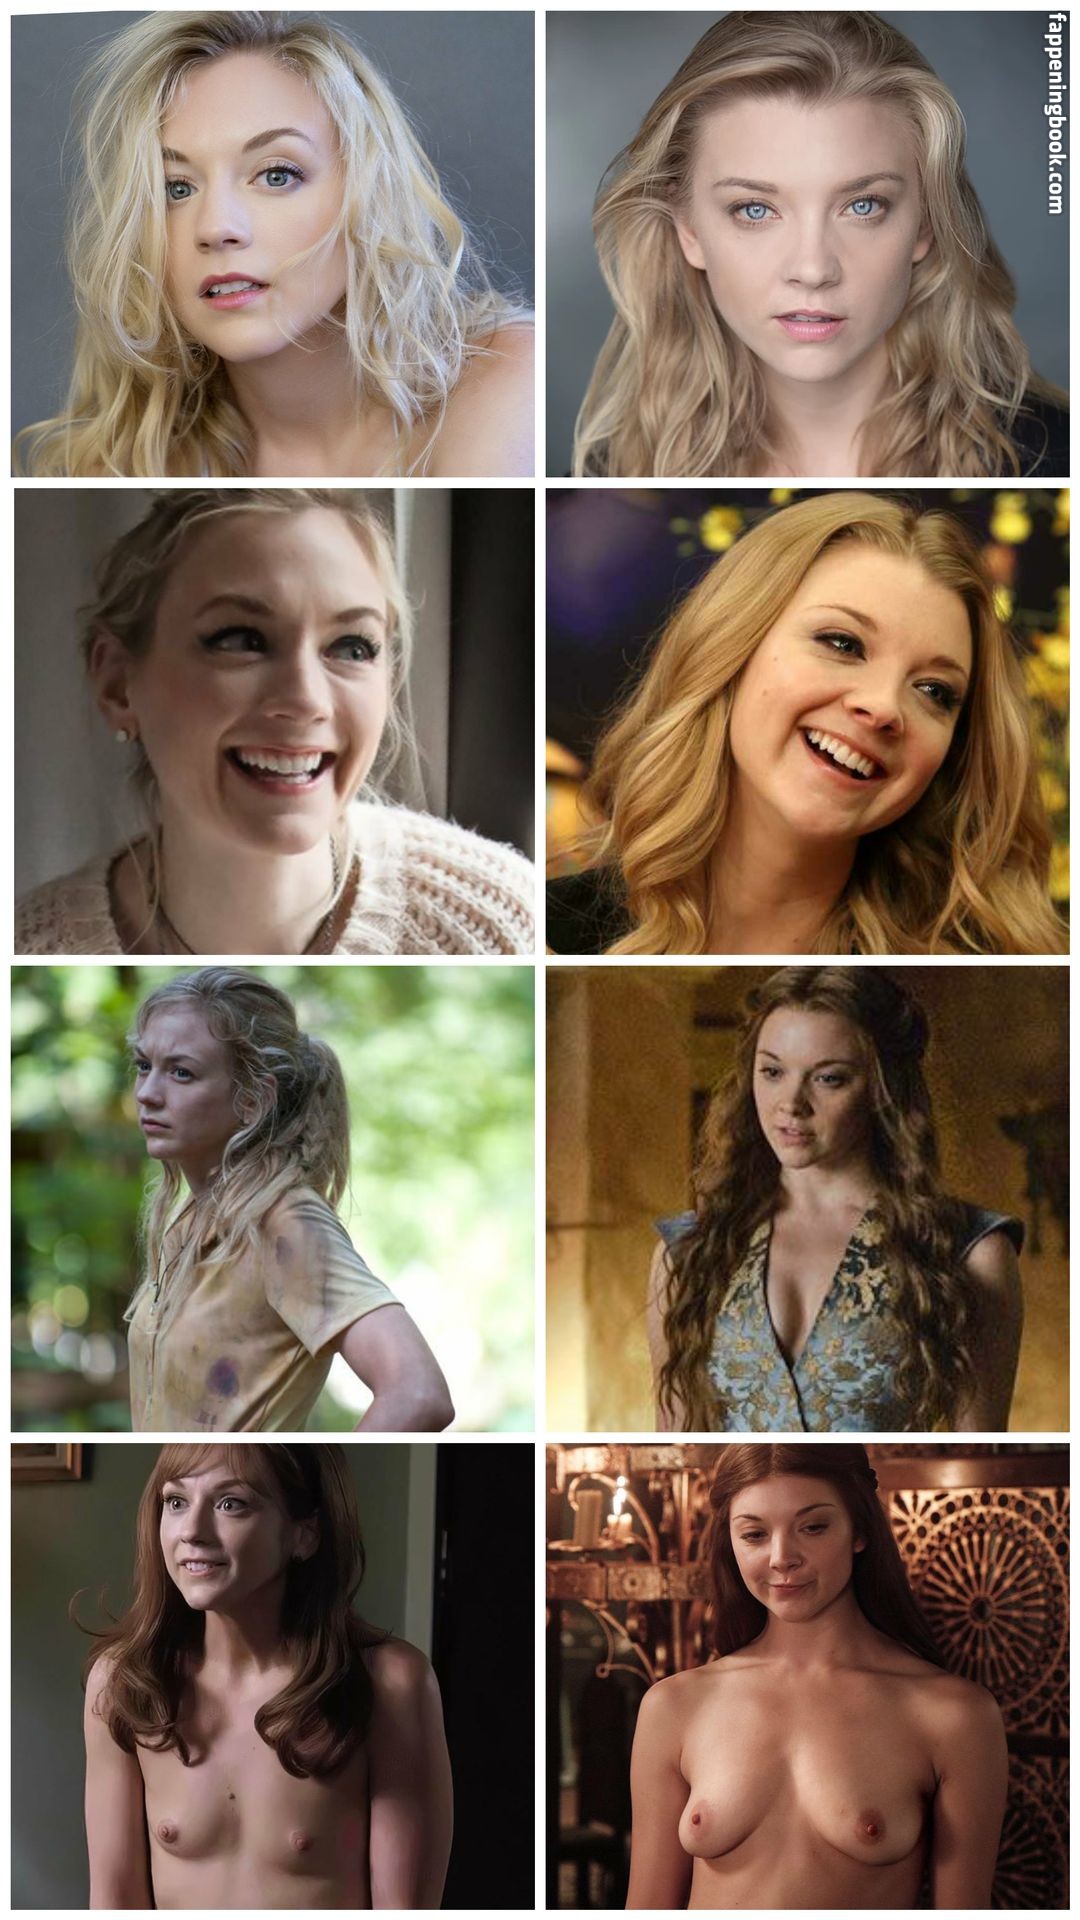 Emily kinney tits - Top 20: Sexiest Actress With Small Boobs.